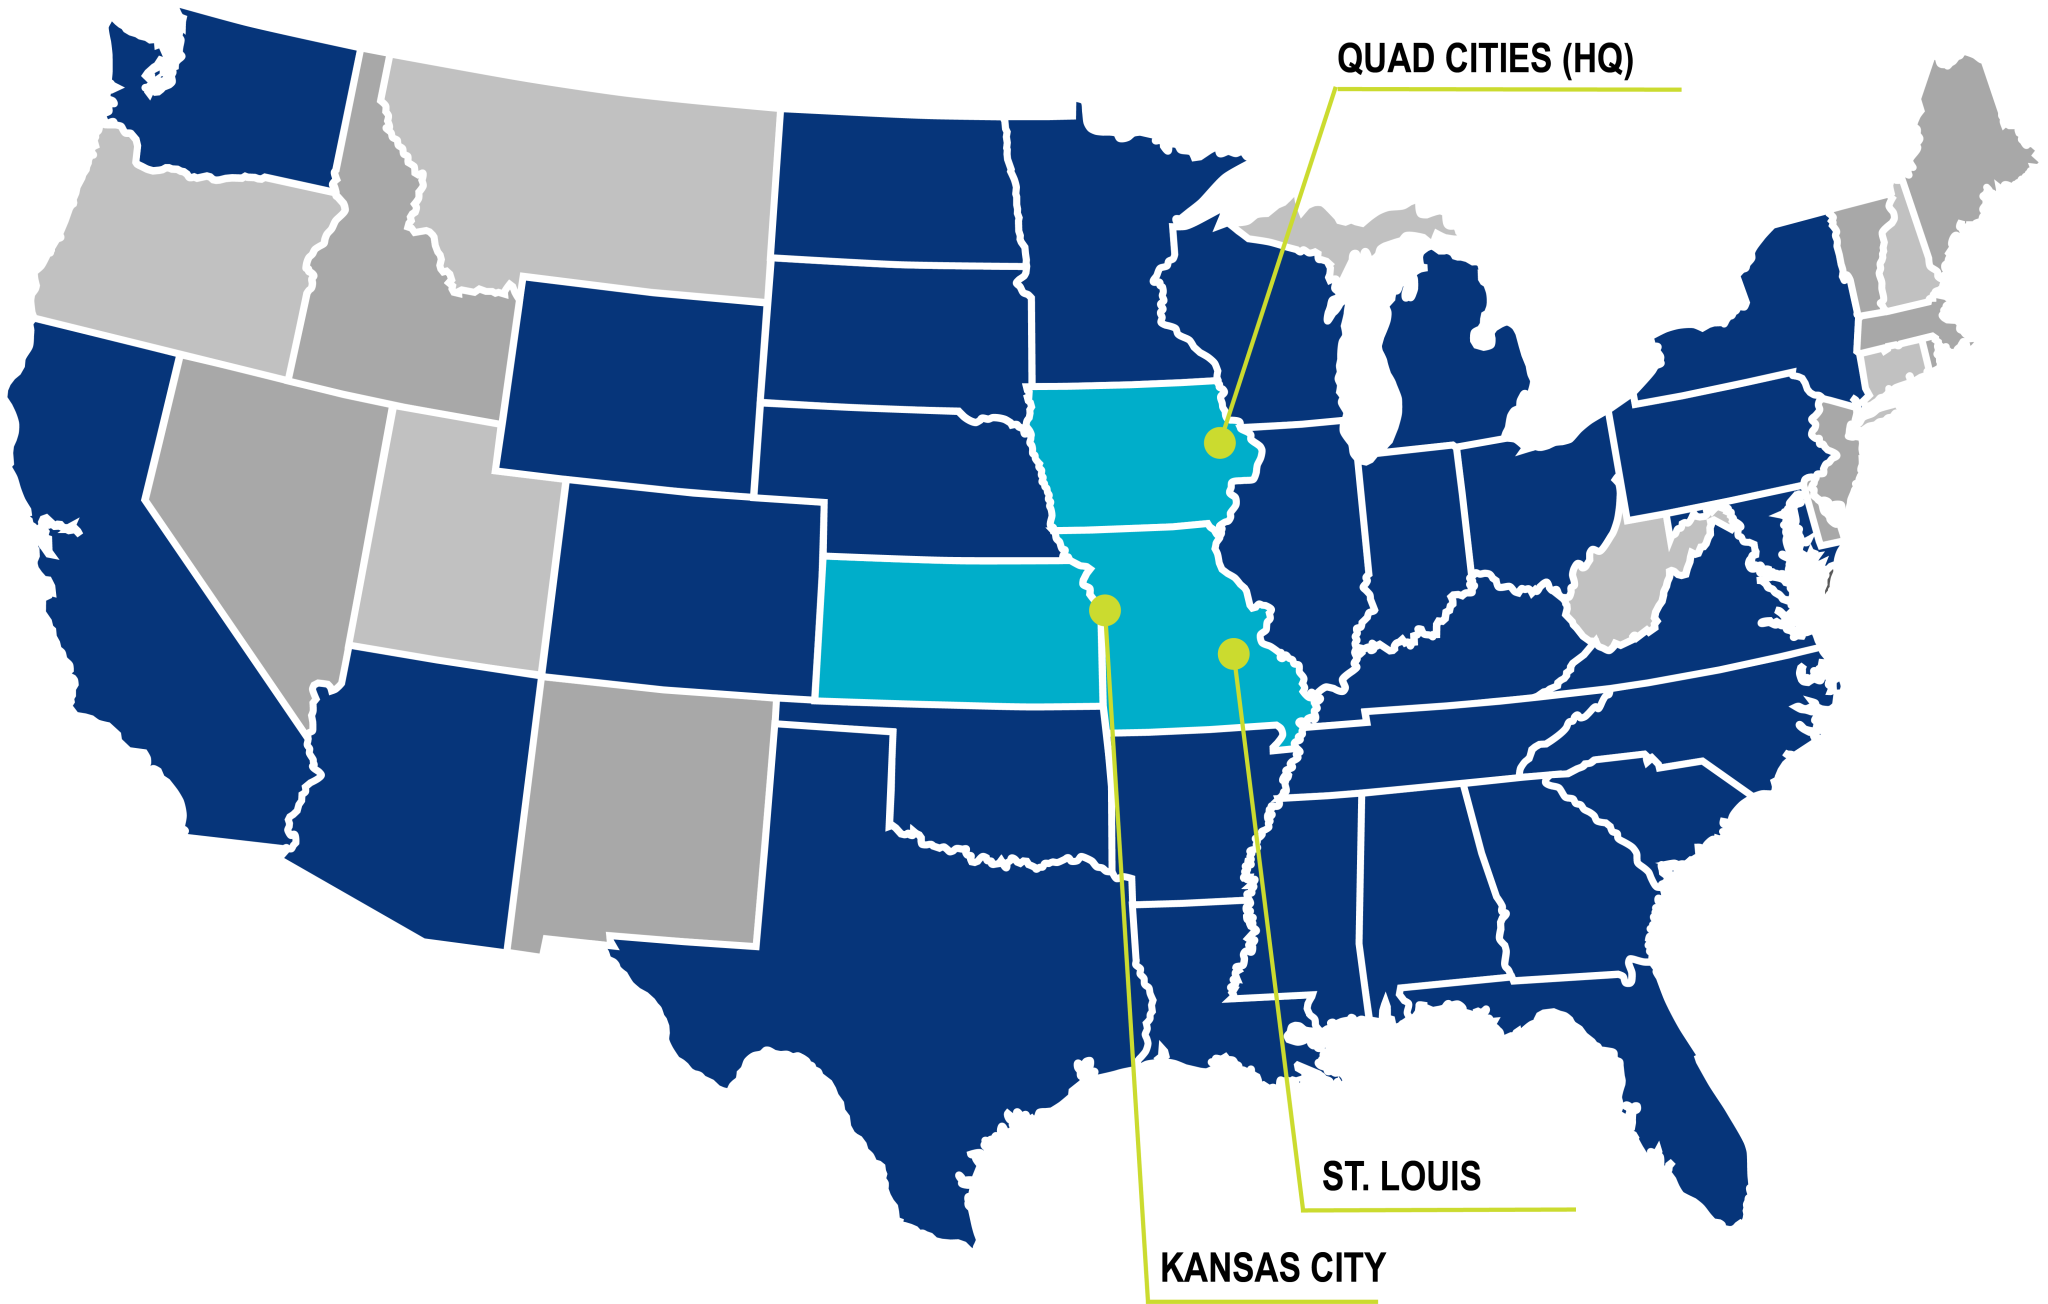 Map of the United States showing the locations for Russell's offices in Davenport, St. Louis, and Kansas City.